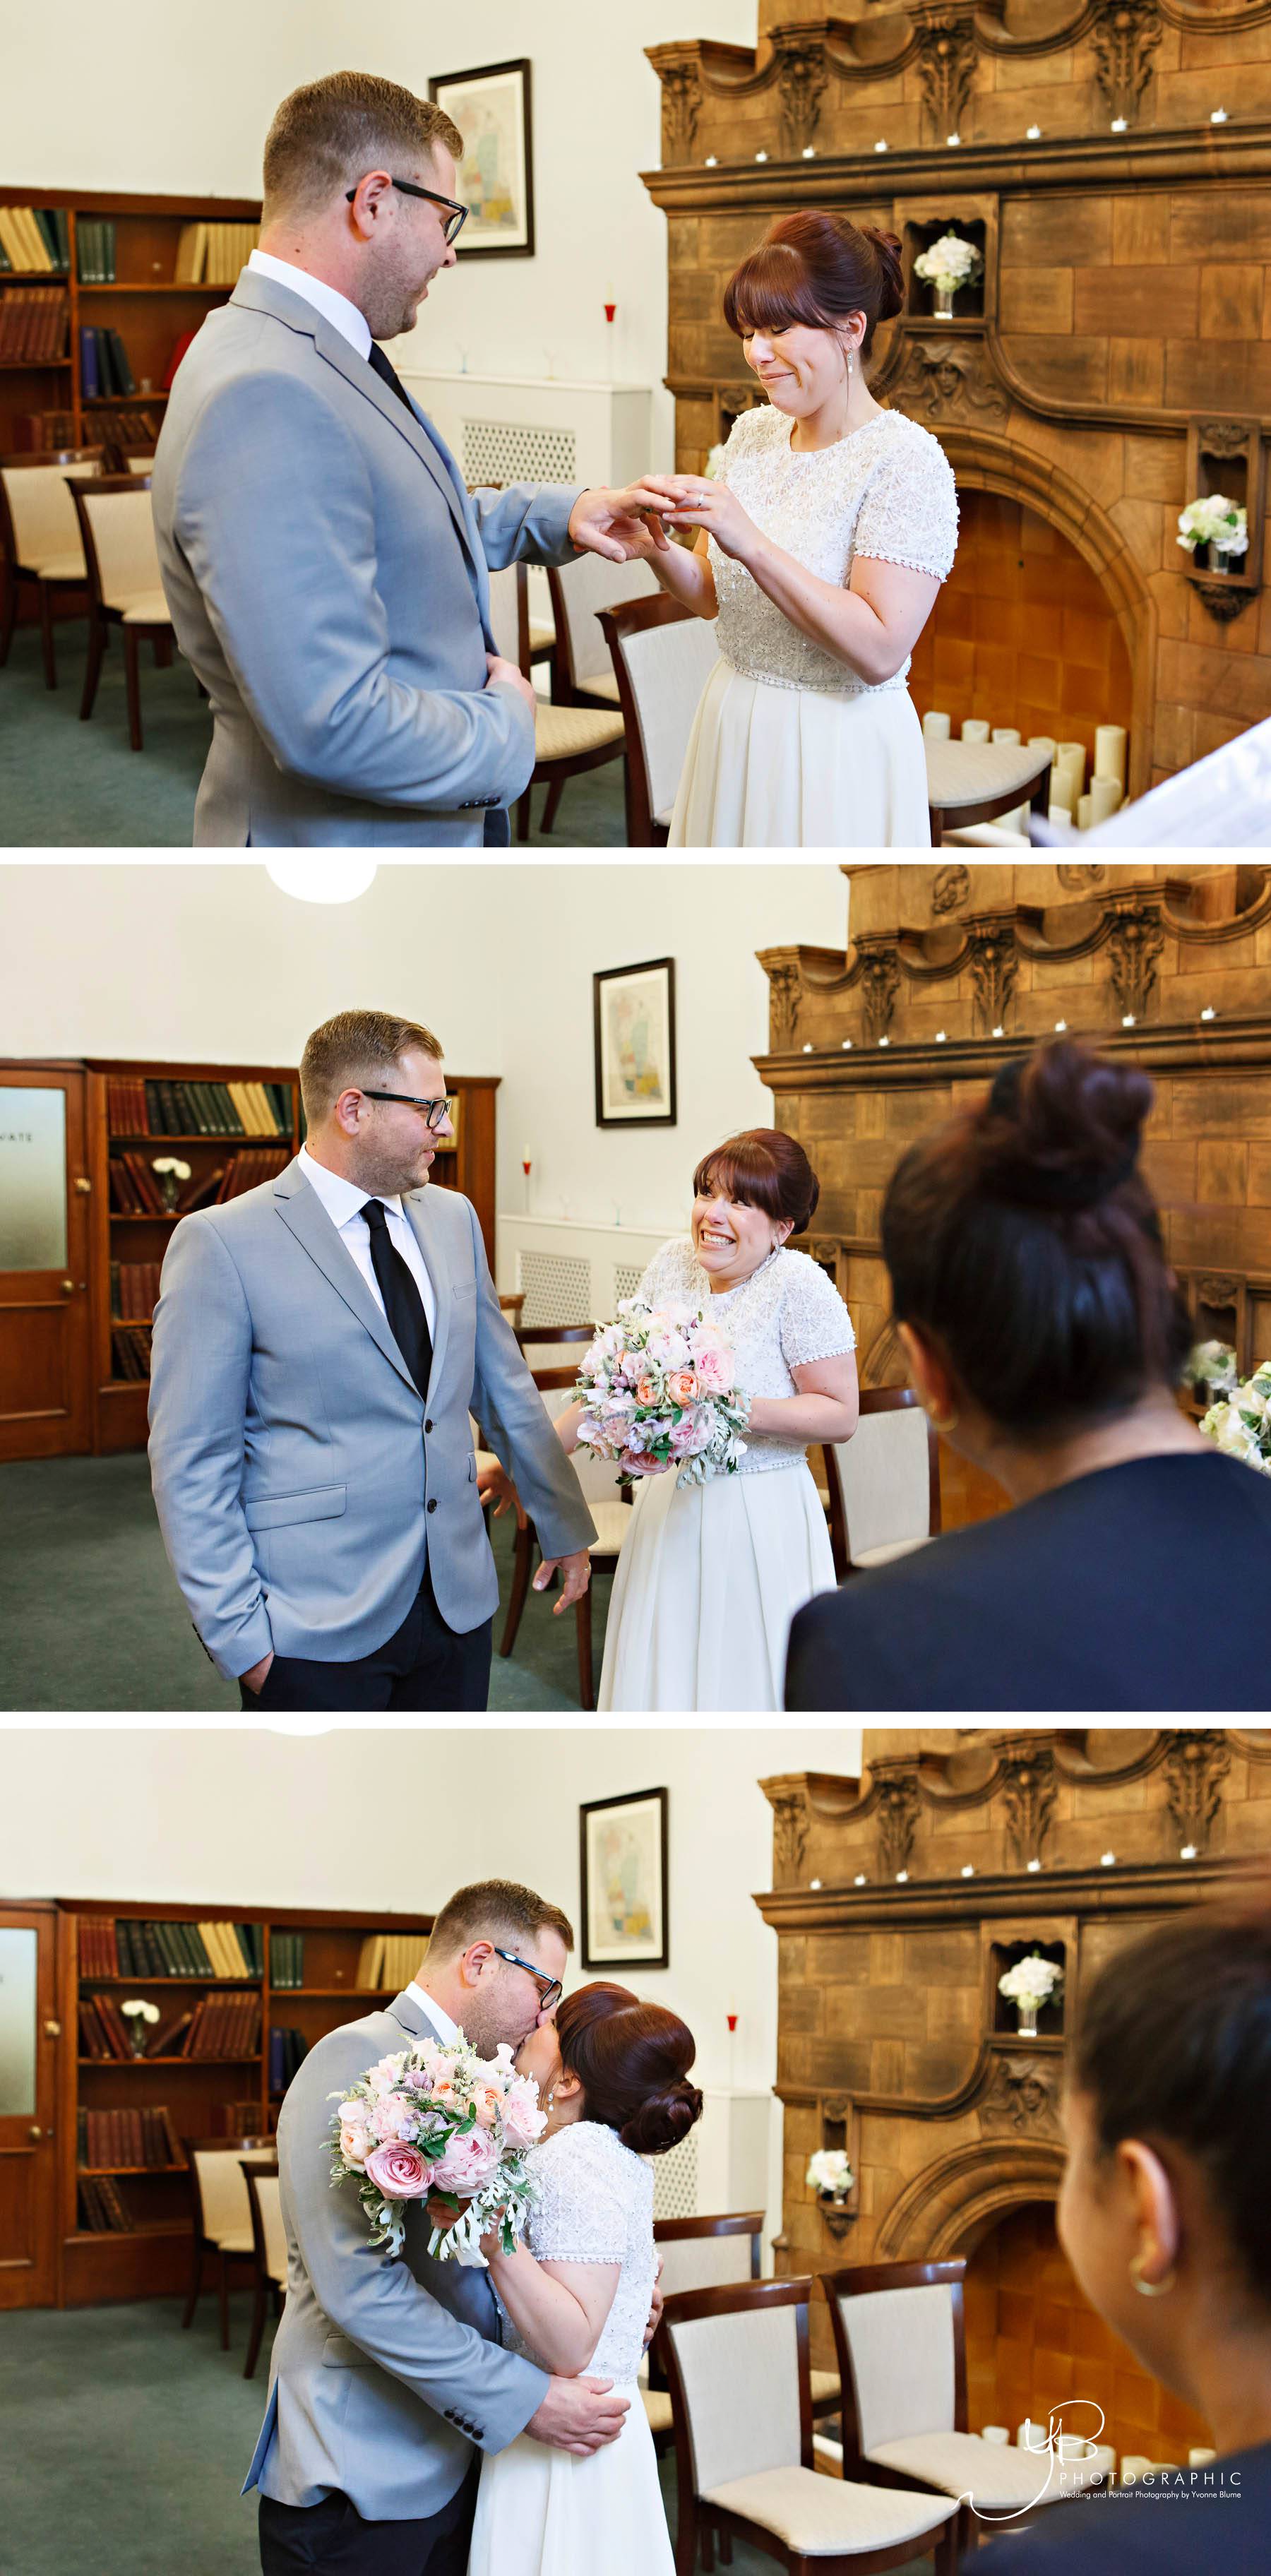 Intimate wedding ceremony at Mayfair Library